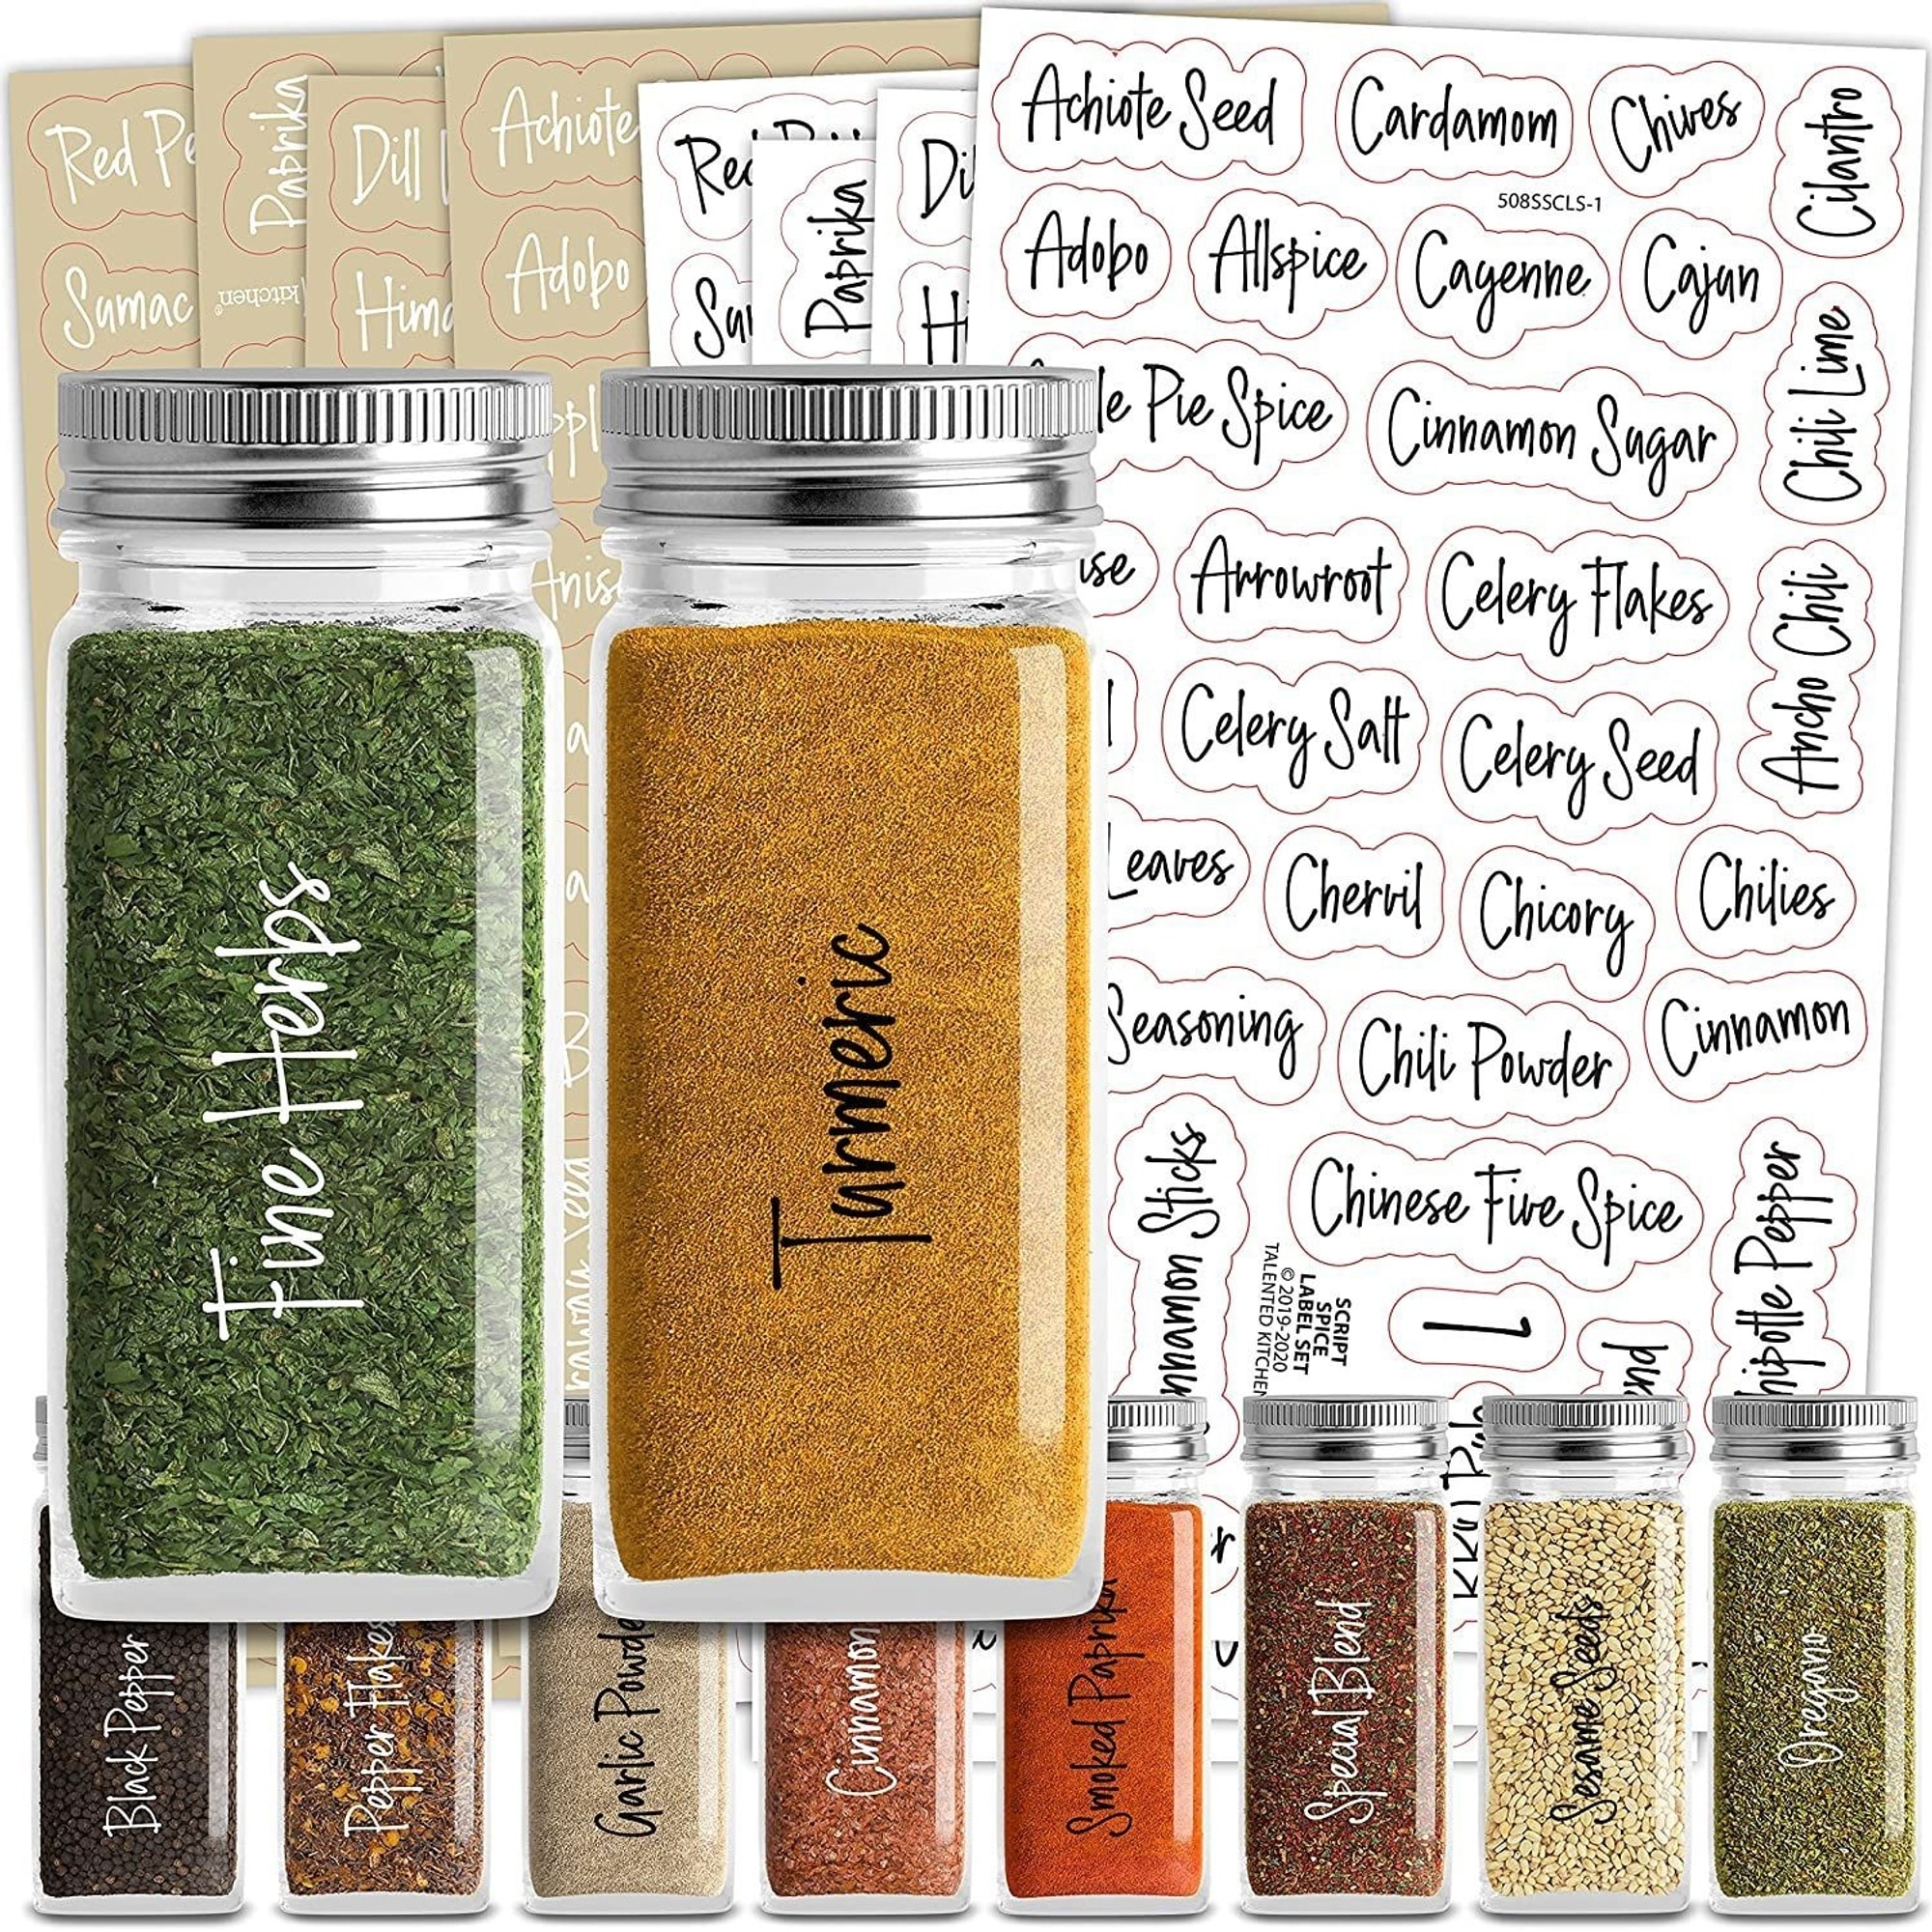 Talented Kitchen 8 Pack Large Glass Spice Bottles